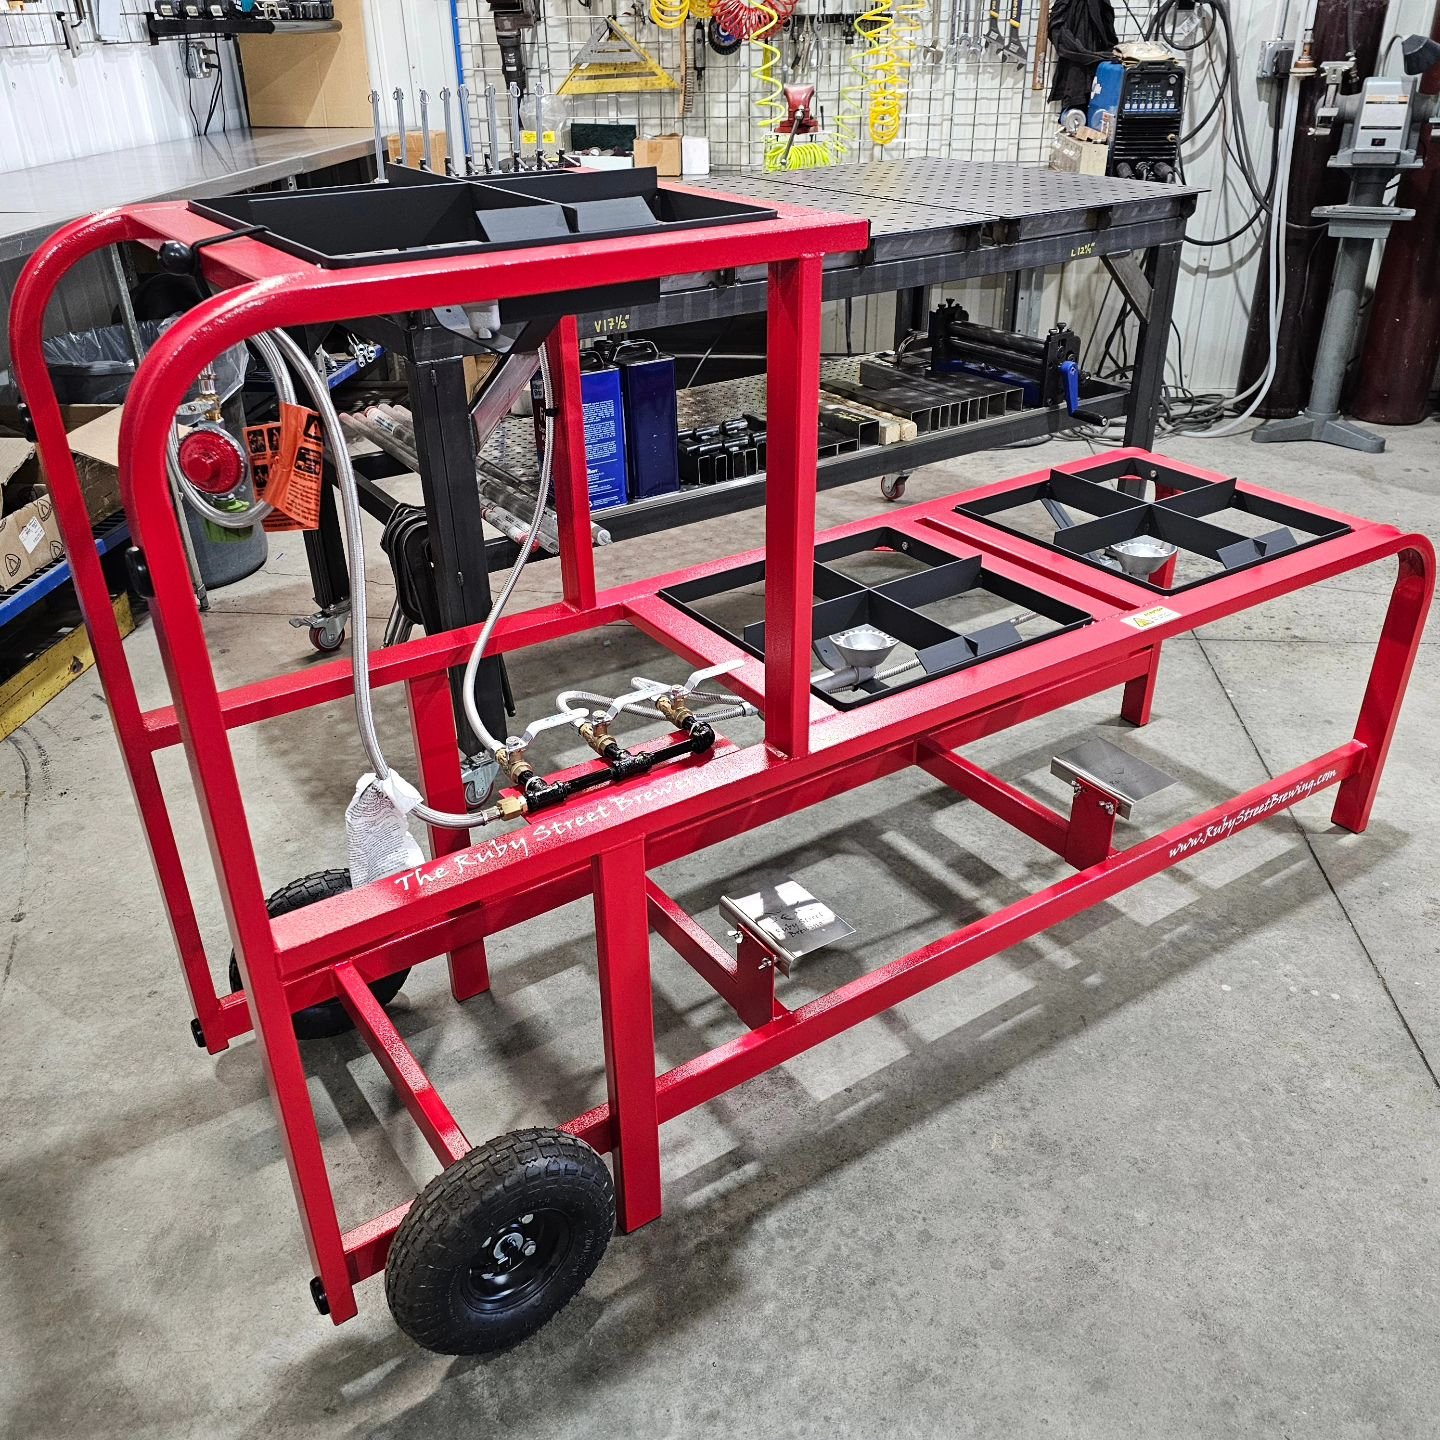 Helping another customer integrate the kettles, pumps, and other accessories they already own into a compact and mobile integrated brewing system.  This frame is our original Ruby Street 2 tier design that we started with over 13 years ago.  This one